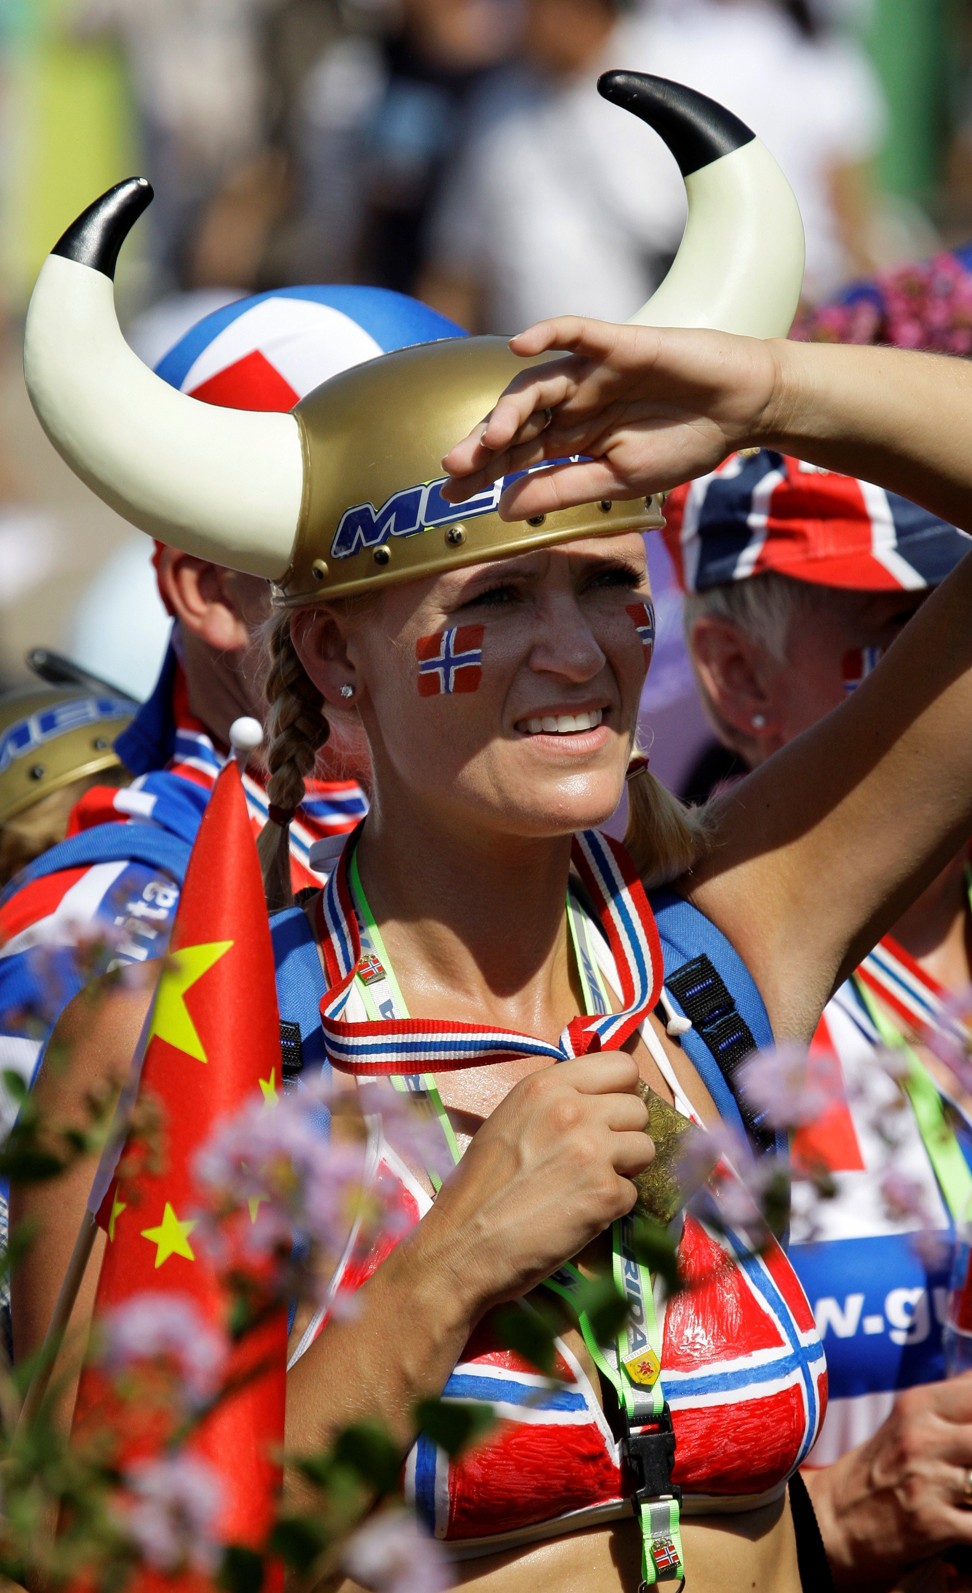 A fan from Norway watches the Mountain Bike Women's Cross Country Cycling event, at the Beijing 2008 Olympics. Photo: AP